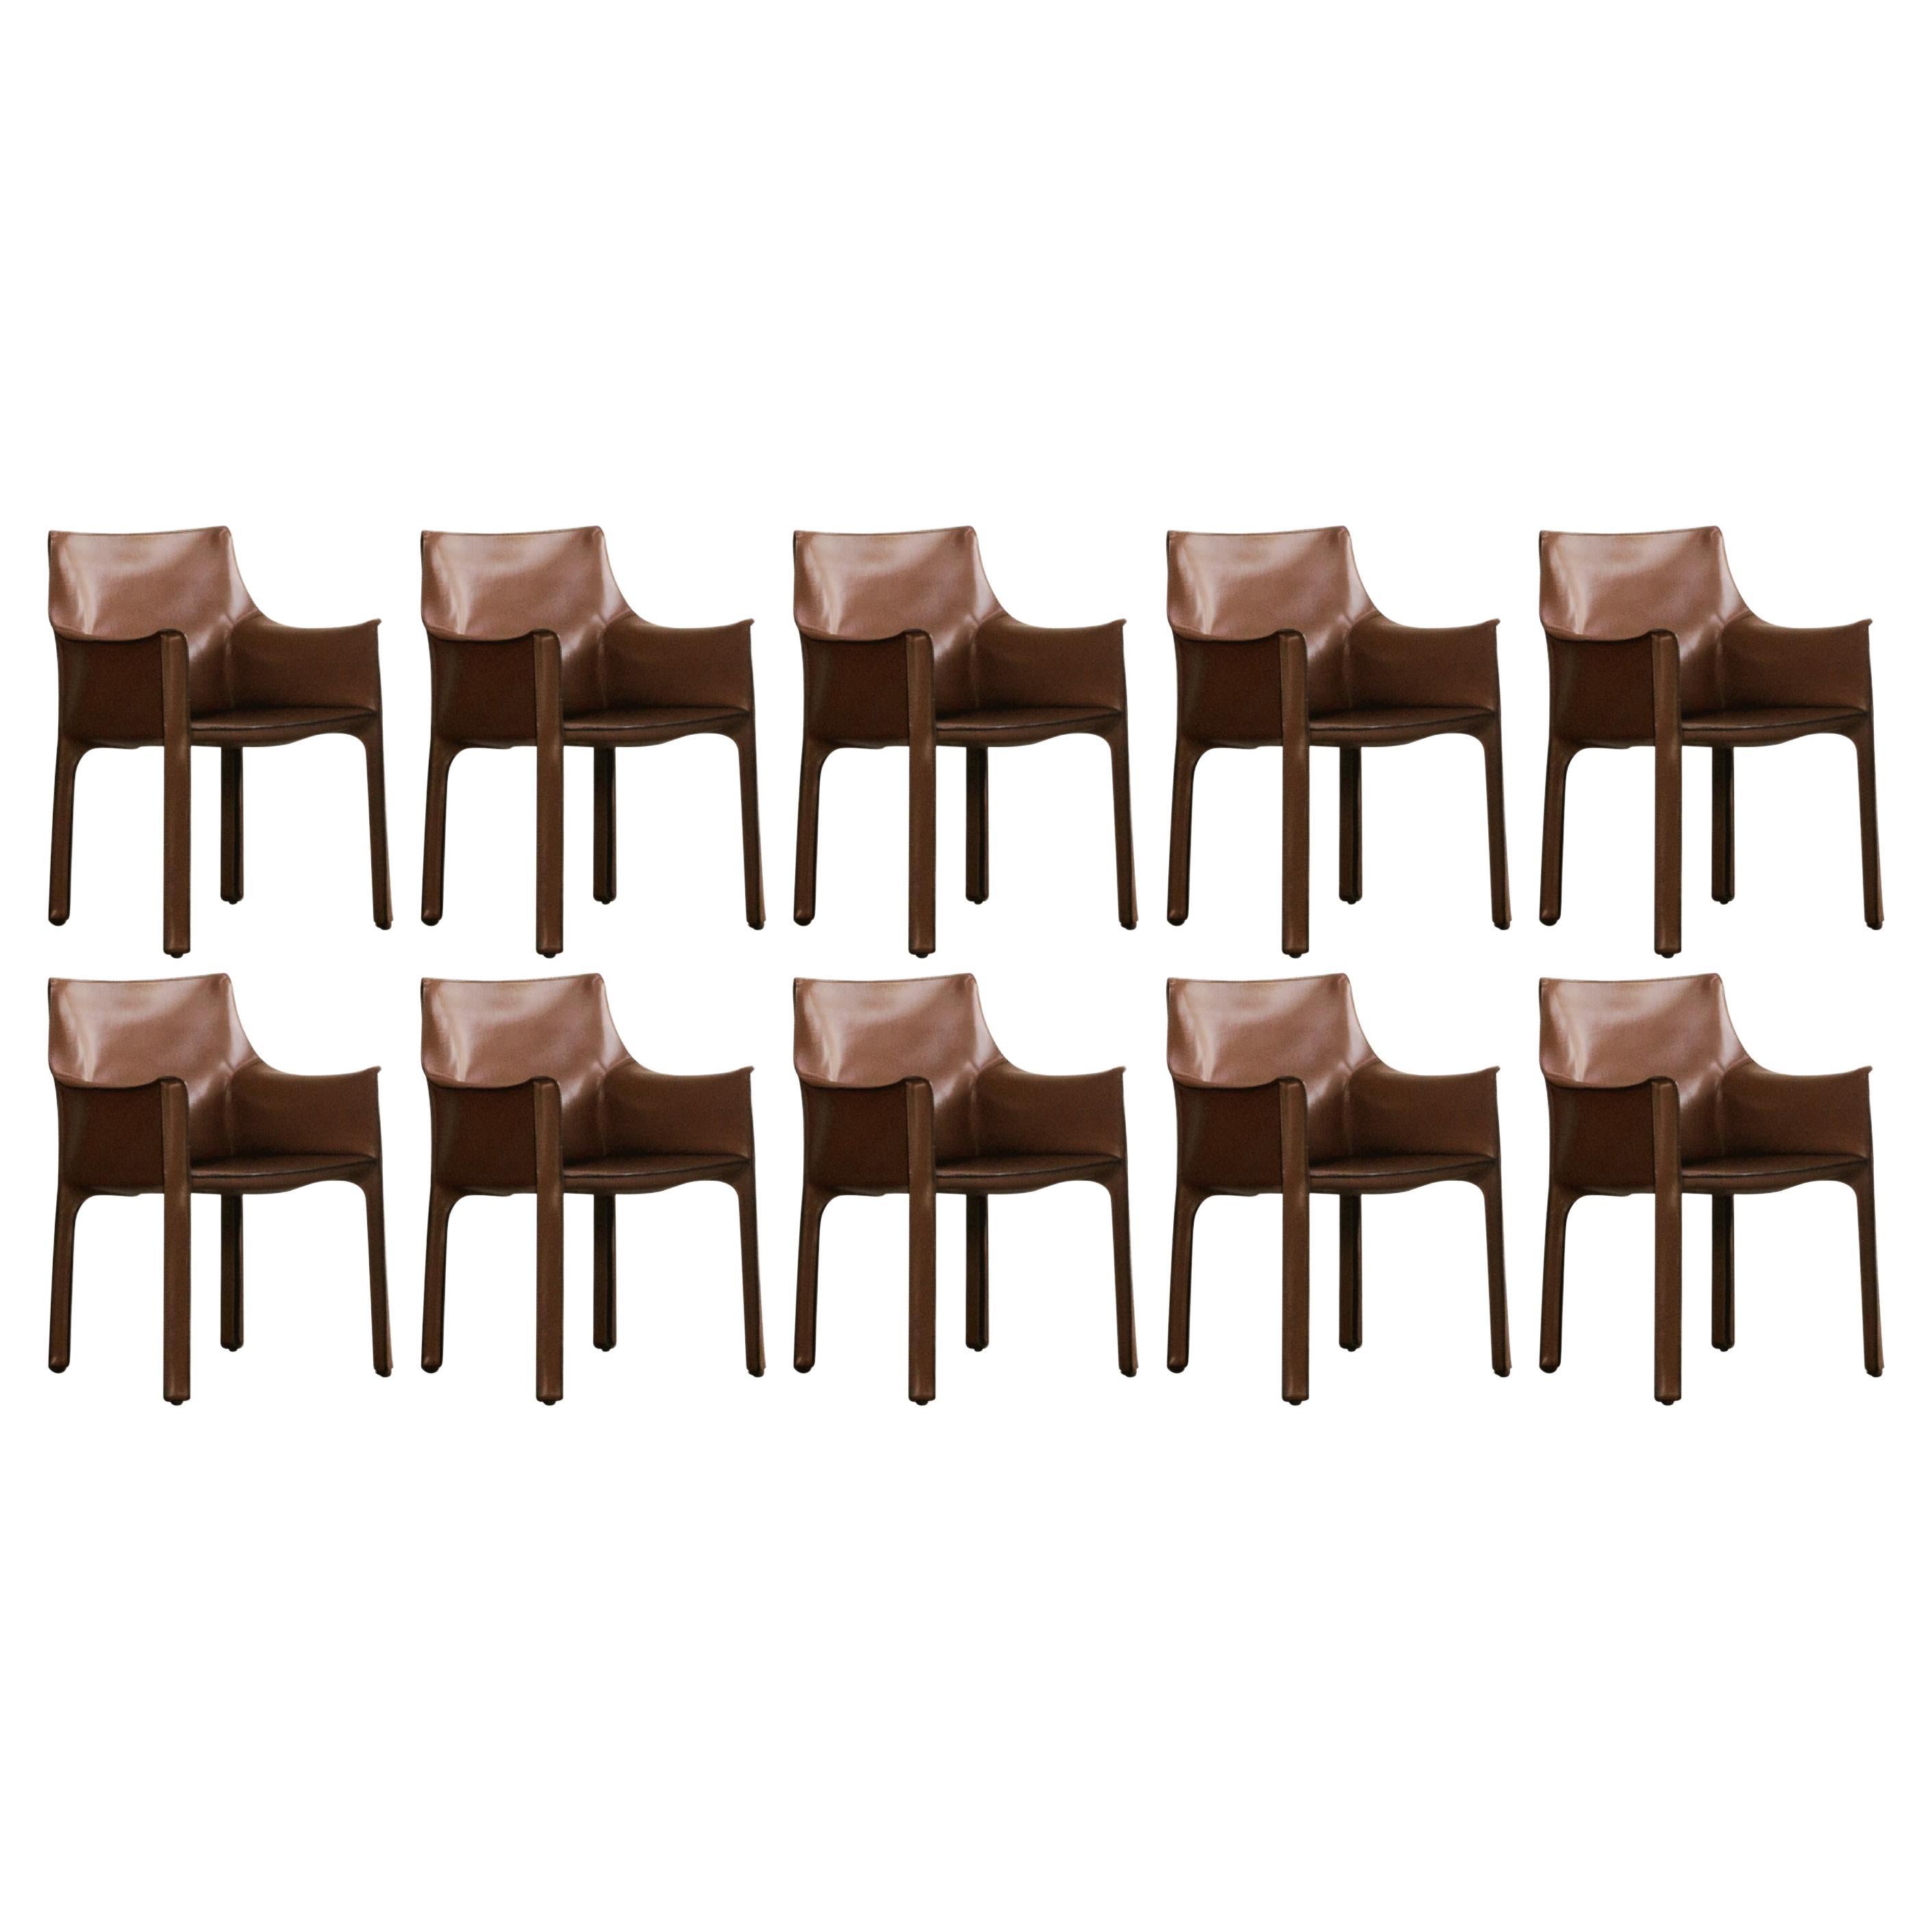 Mario Bellini "CAB 413" Chairs for Cassina in Light Brown, 1977, Set of 10 For Sale